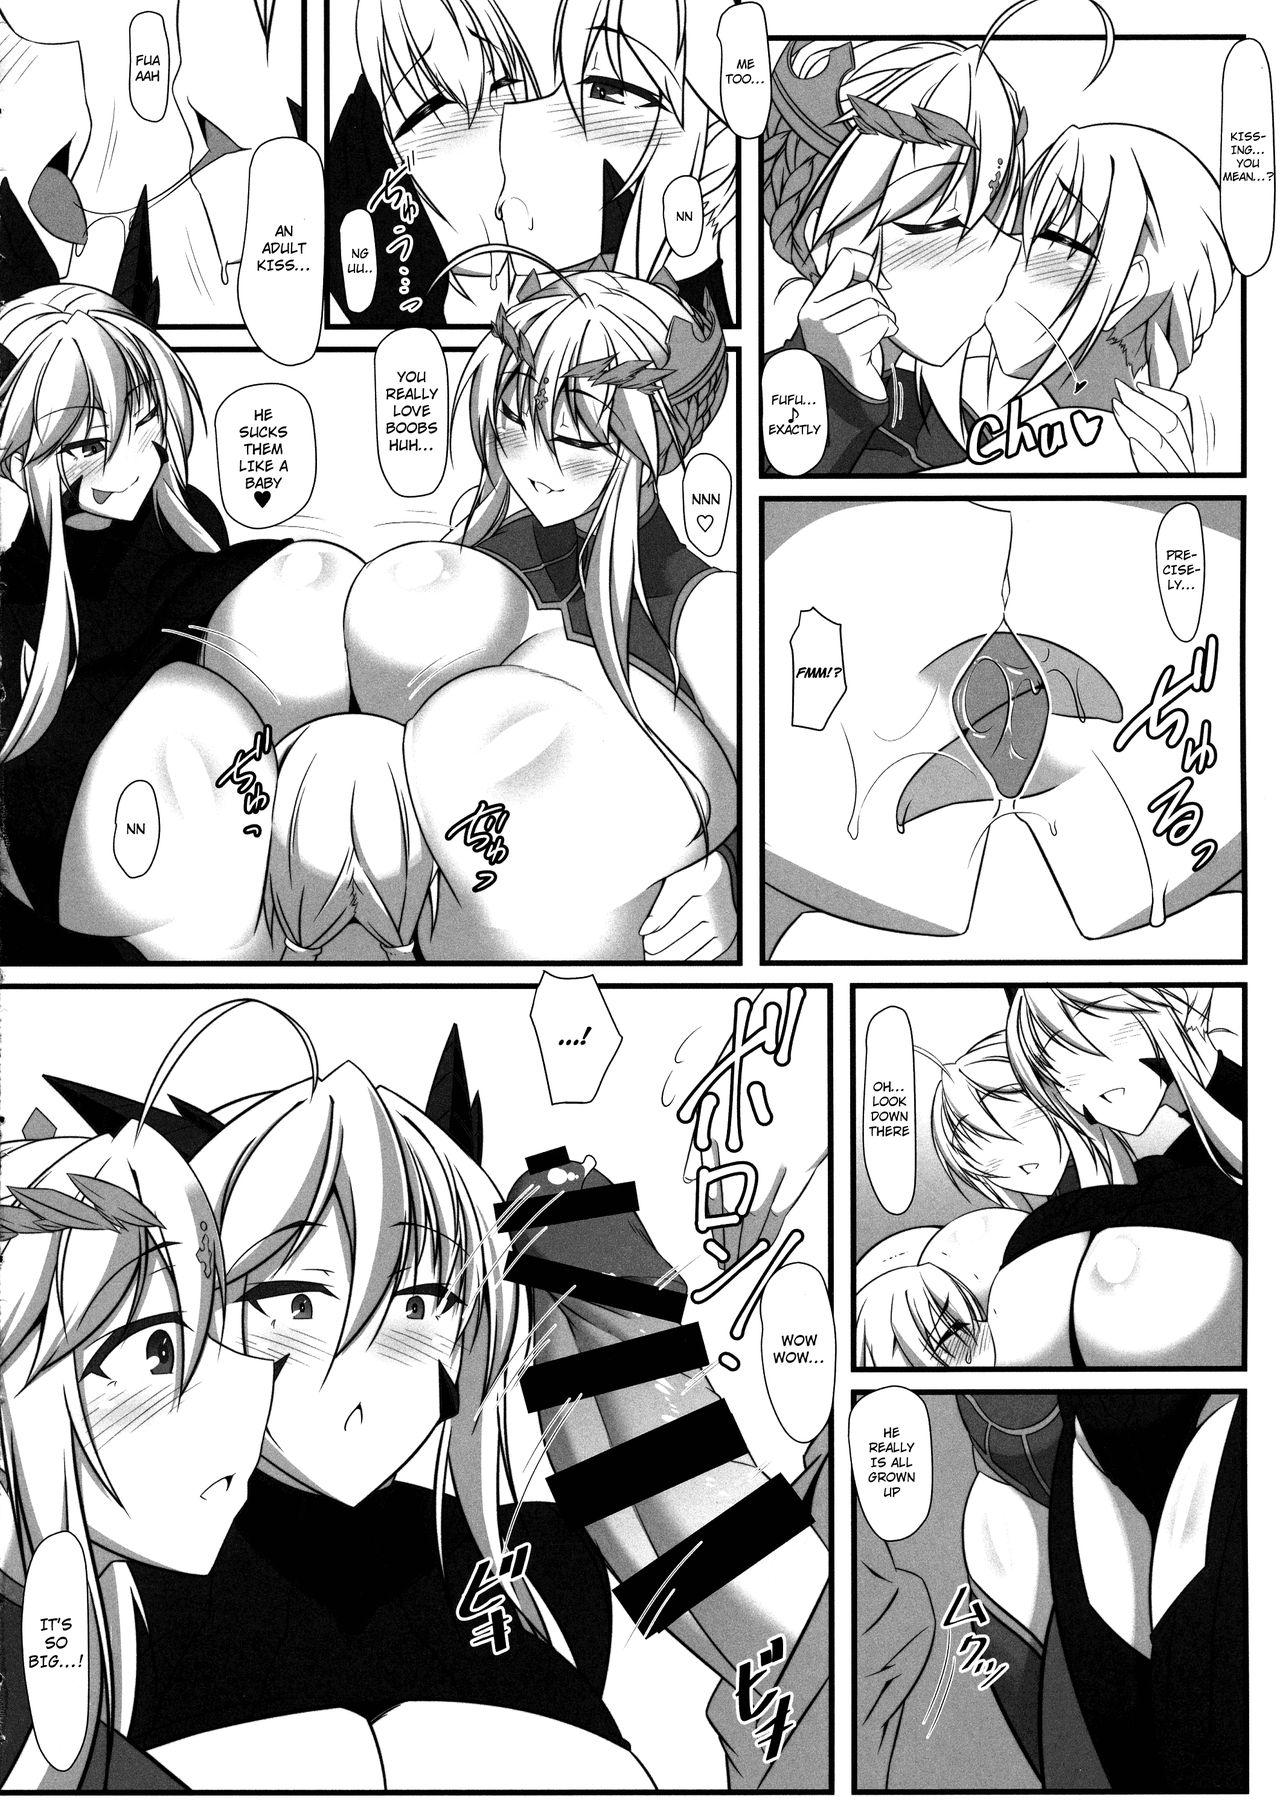 Skirt Souou to Maguau - Fate grand order Blackwoman - Page 7